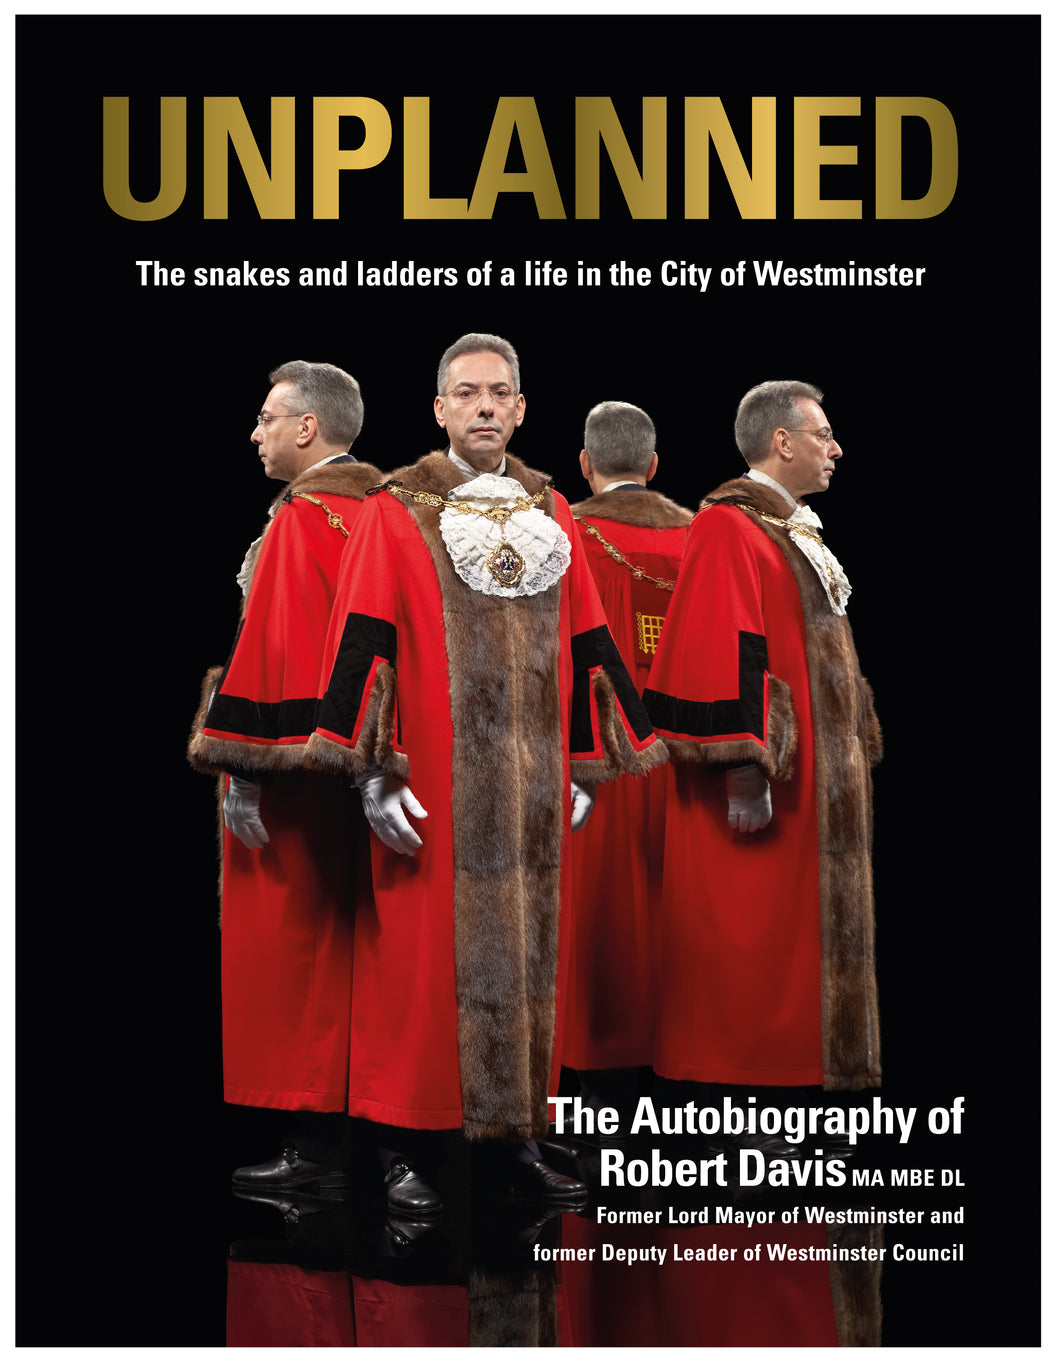 UnPlanned: The Snakes and Ladders of a Life in the City of Westminster - Robert Davis MA MBE DL